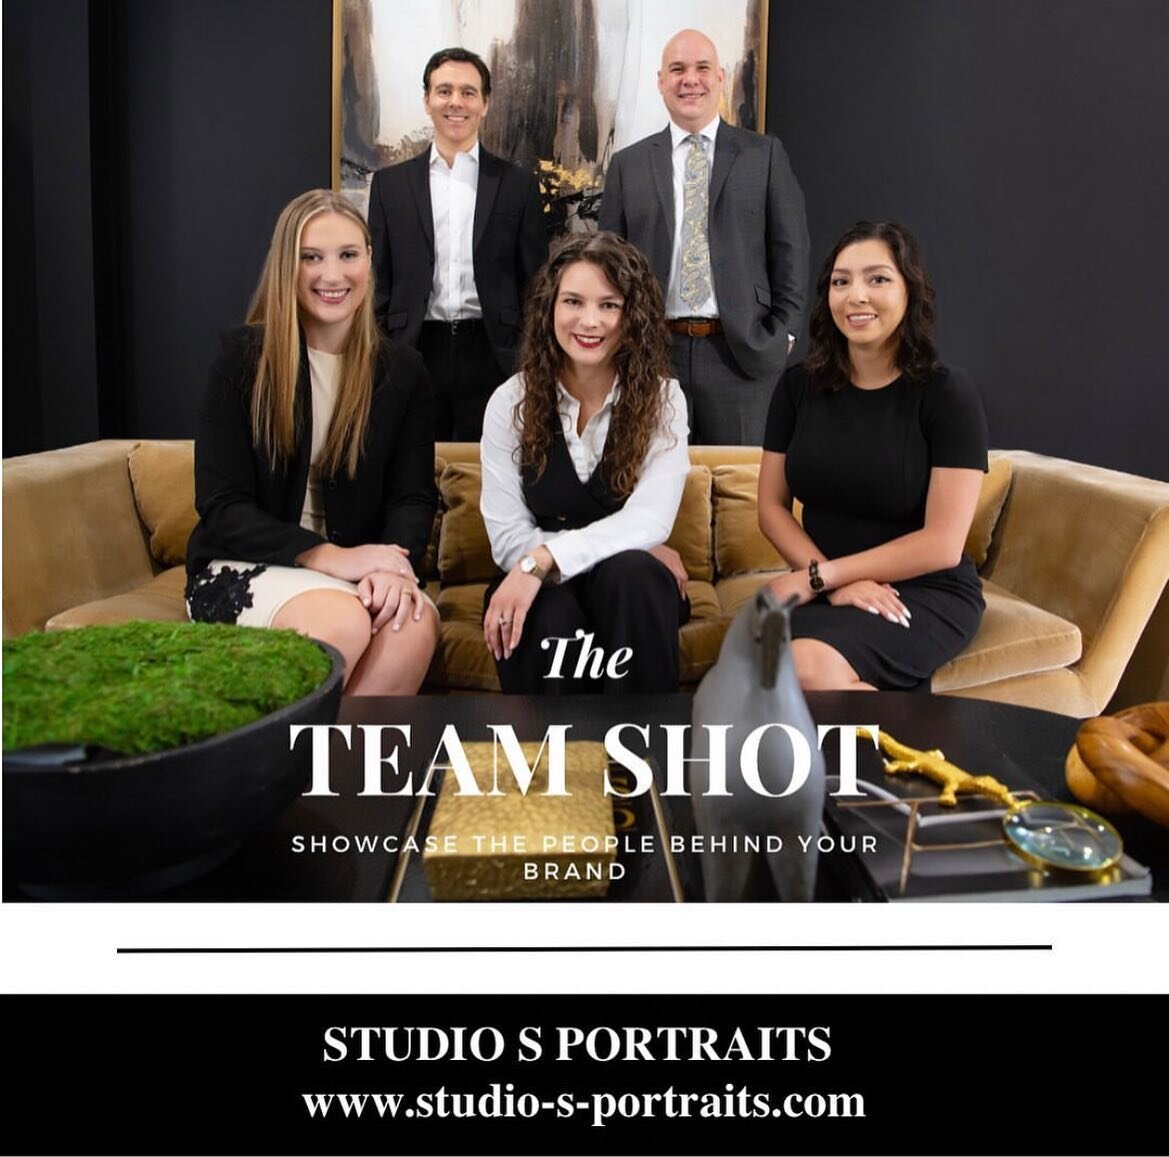 What a great looking Team!@studio_s_portraits worked with the location and created an &ldquo;Office&rdquo; environment. You would never know this was a rented apartment. She has such an eye for placement and the image speaks for itself.  Reach out fo